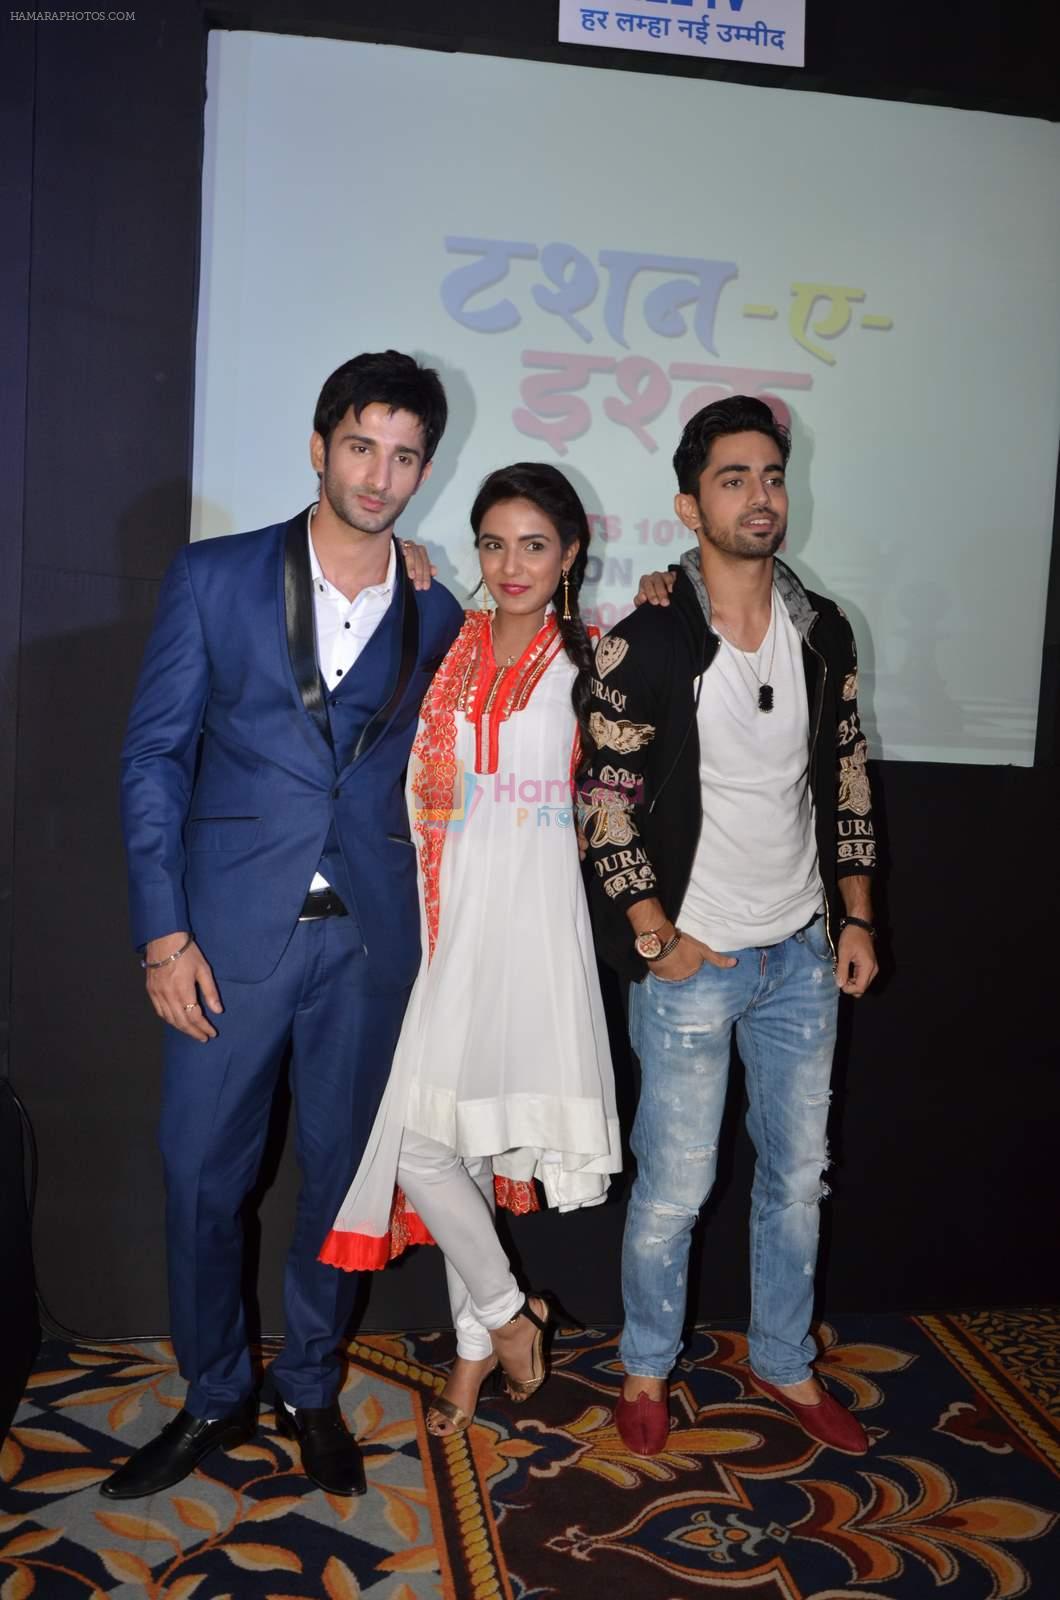 at Zee launches Tashan E Ishq in Leela on 4th Aug 2015